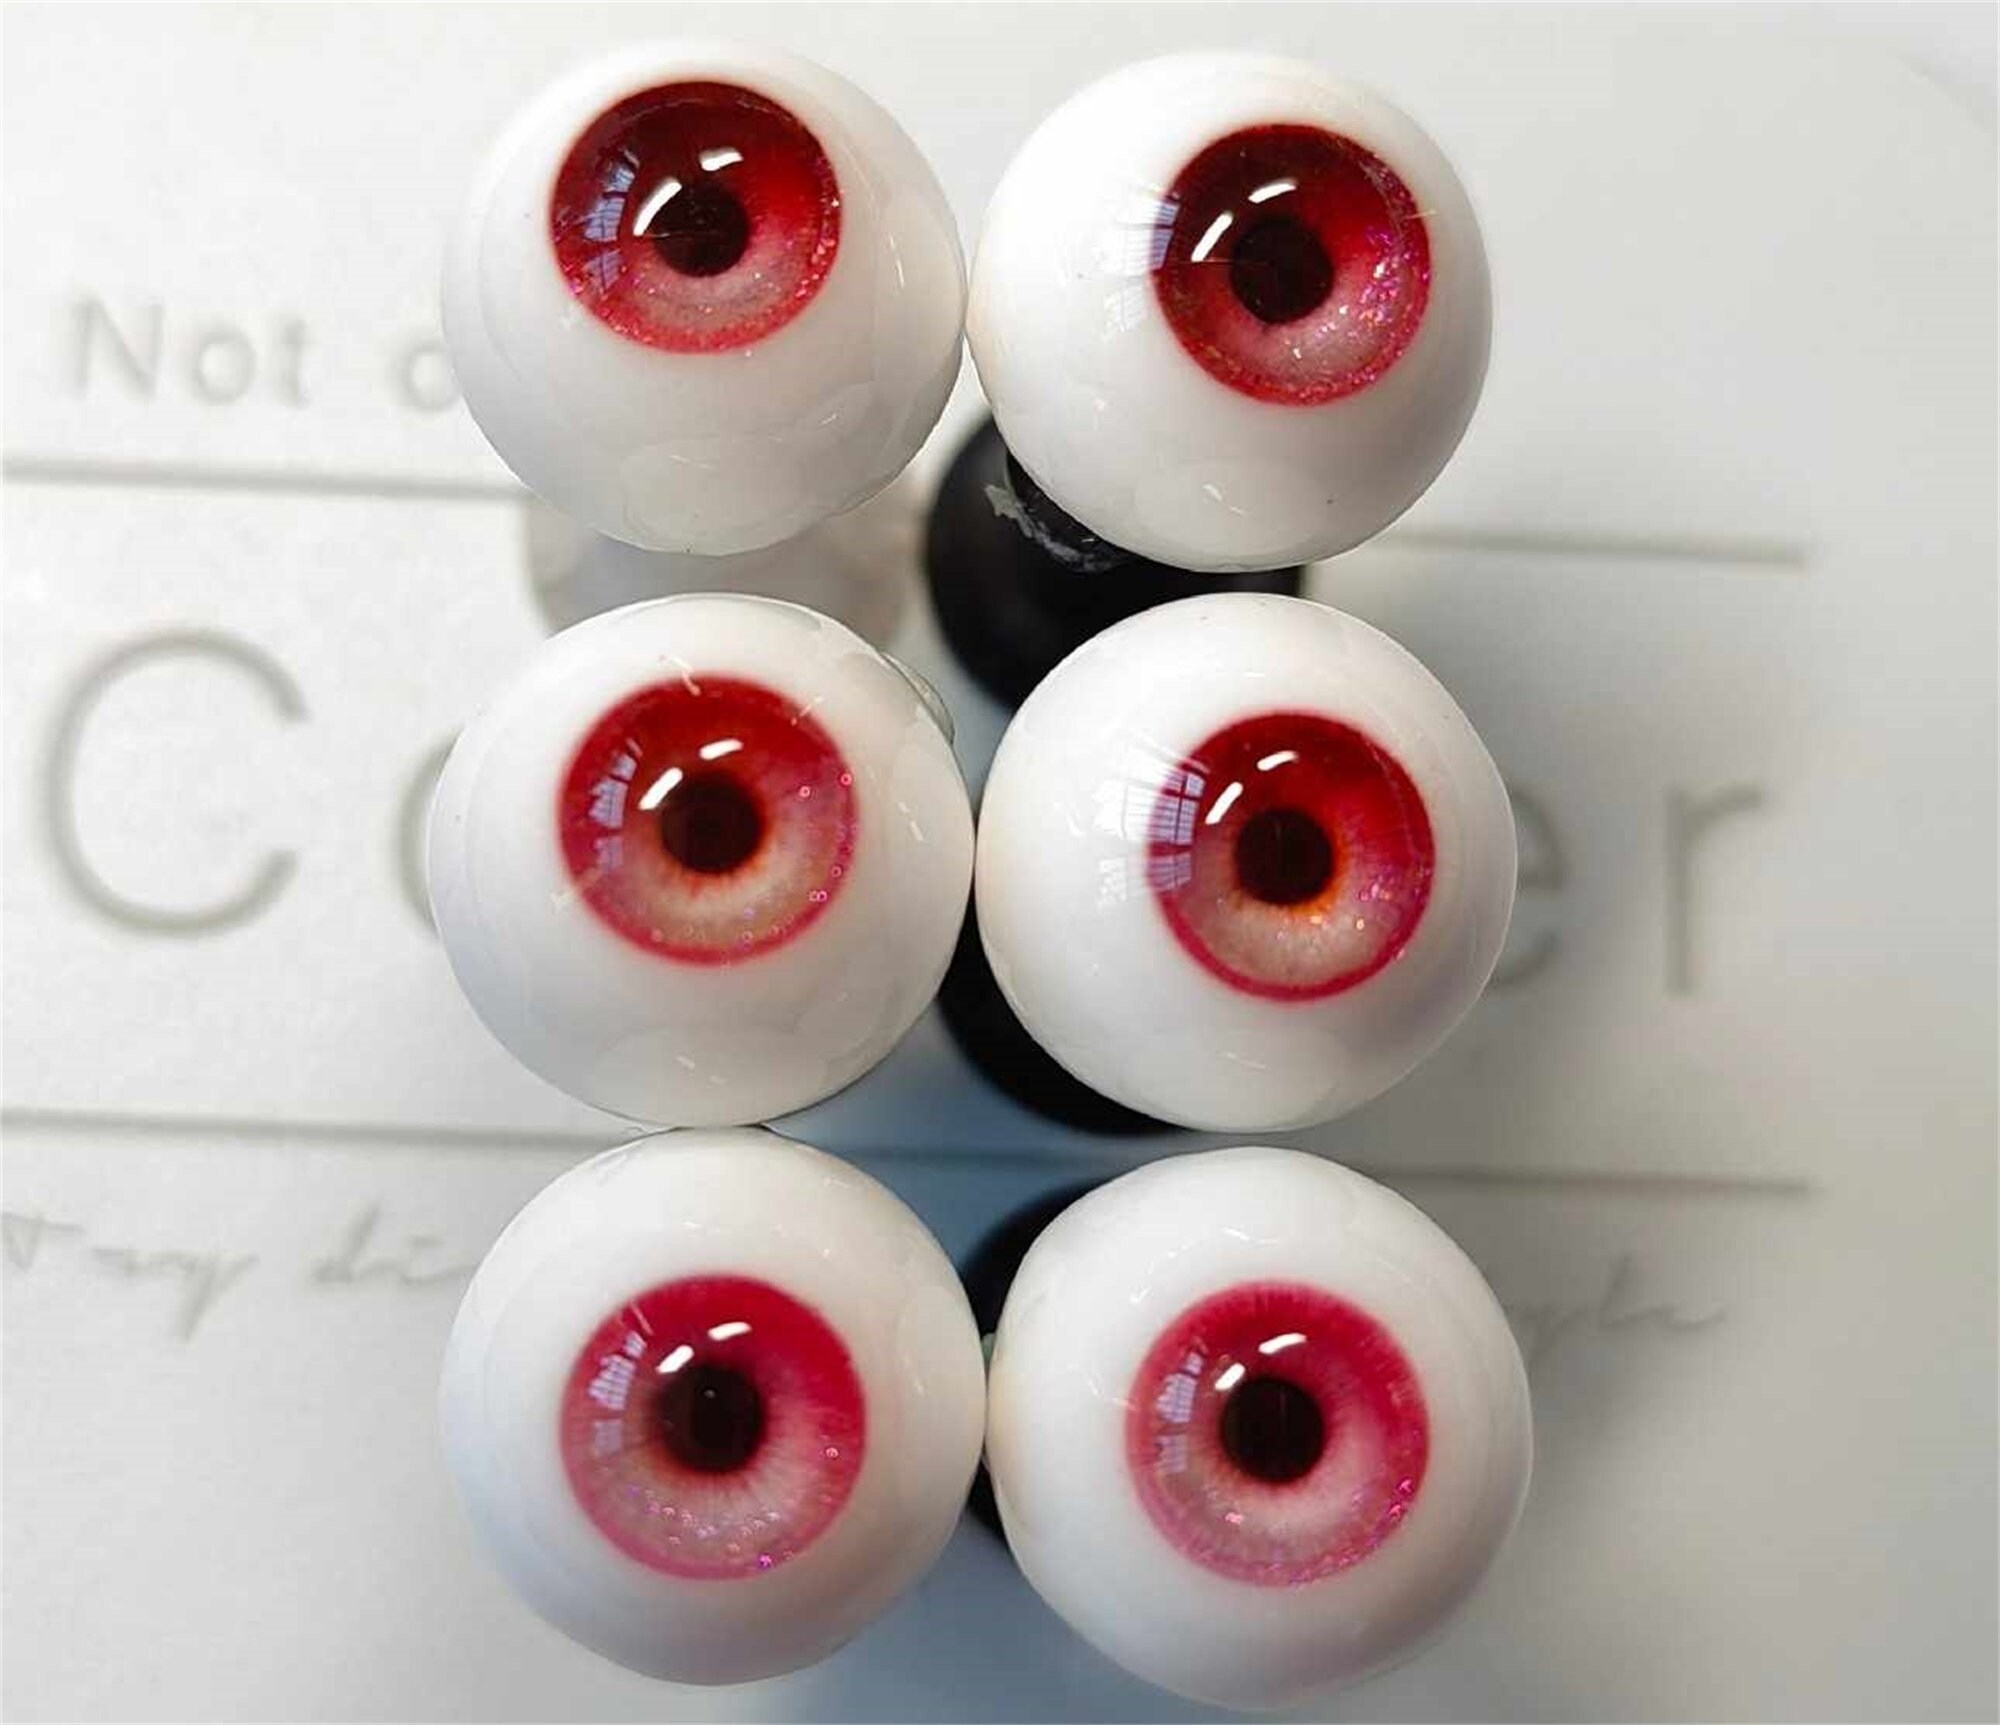 12mm Pink Iris Red Pupil Round Safety Eyes and Washers: 3 Pairs - Doll /  Amigurumi / Animals / Stuffed Creations / Crochet / Knit / Doll